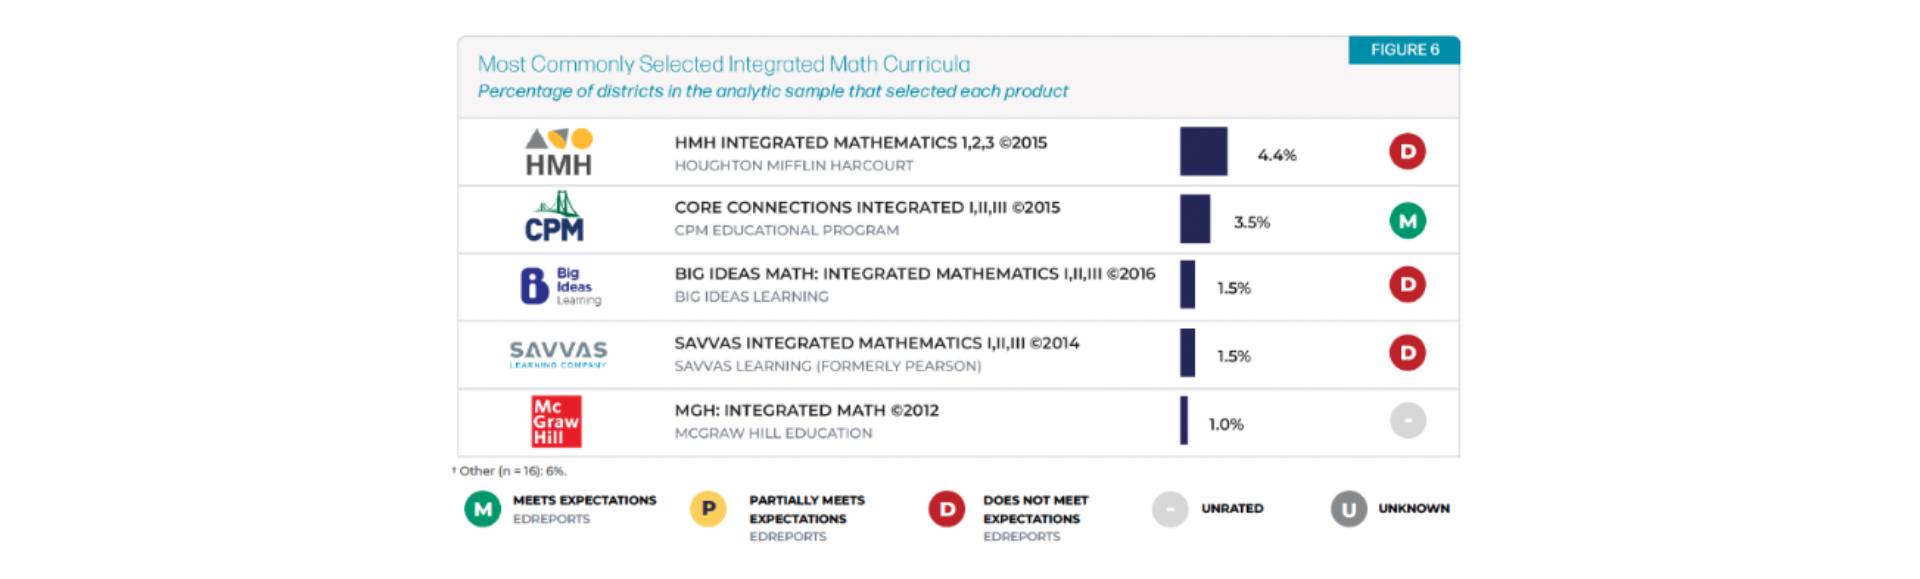 Most Commonly Selected Integrated Math Curricula